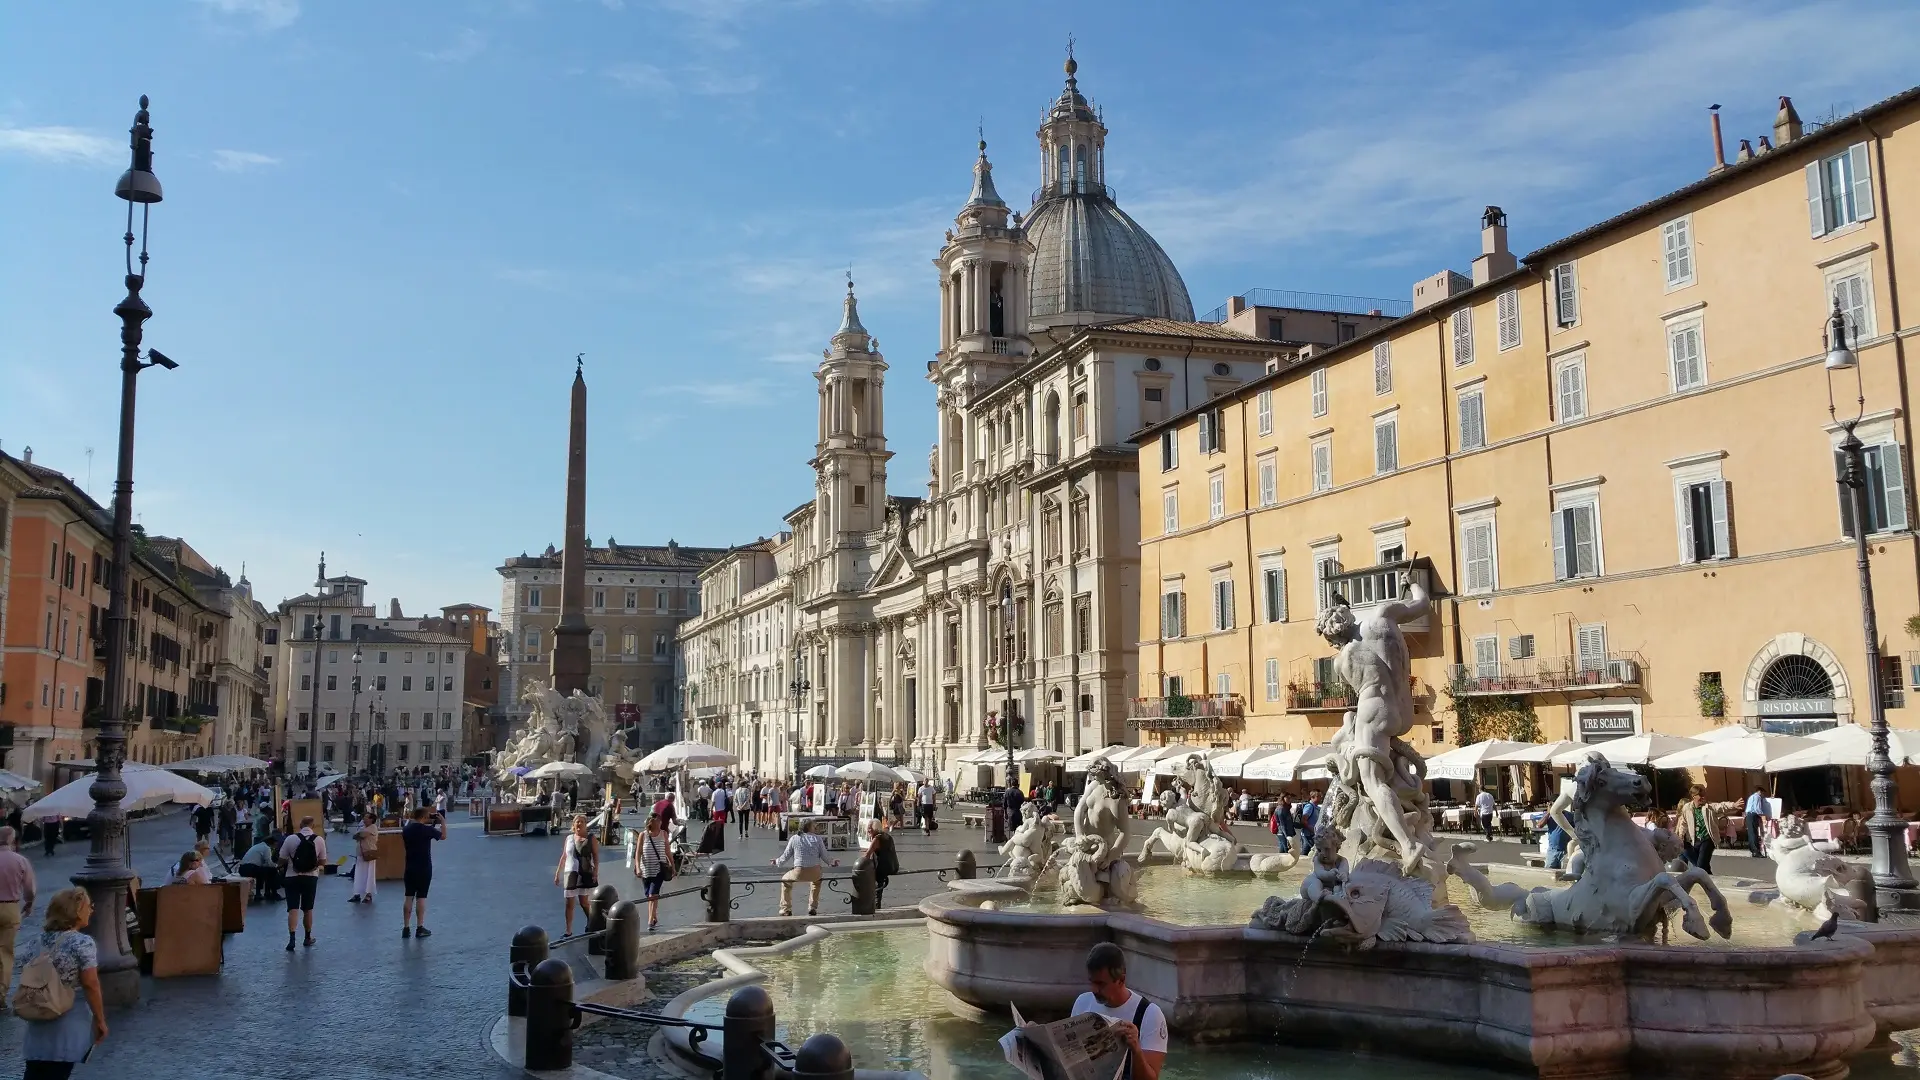 "Photograph of Piazza Navona in Rome, showcasing the bustling square with its famous fountains, Baroque architecture, and outdoor cafes. Visitors and locals are seen strolling, enjoying the vibrant atmosphere under a clear blue sky."